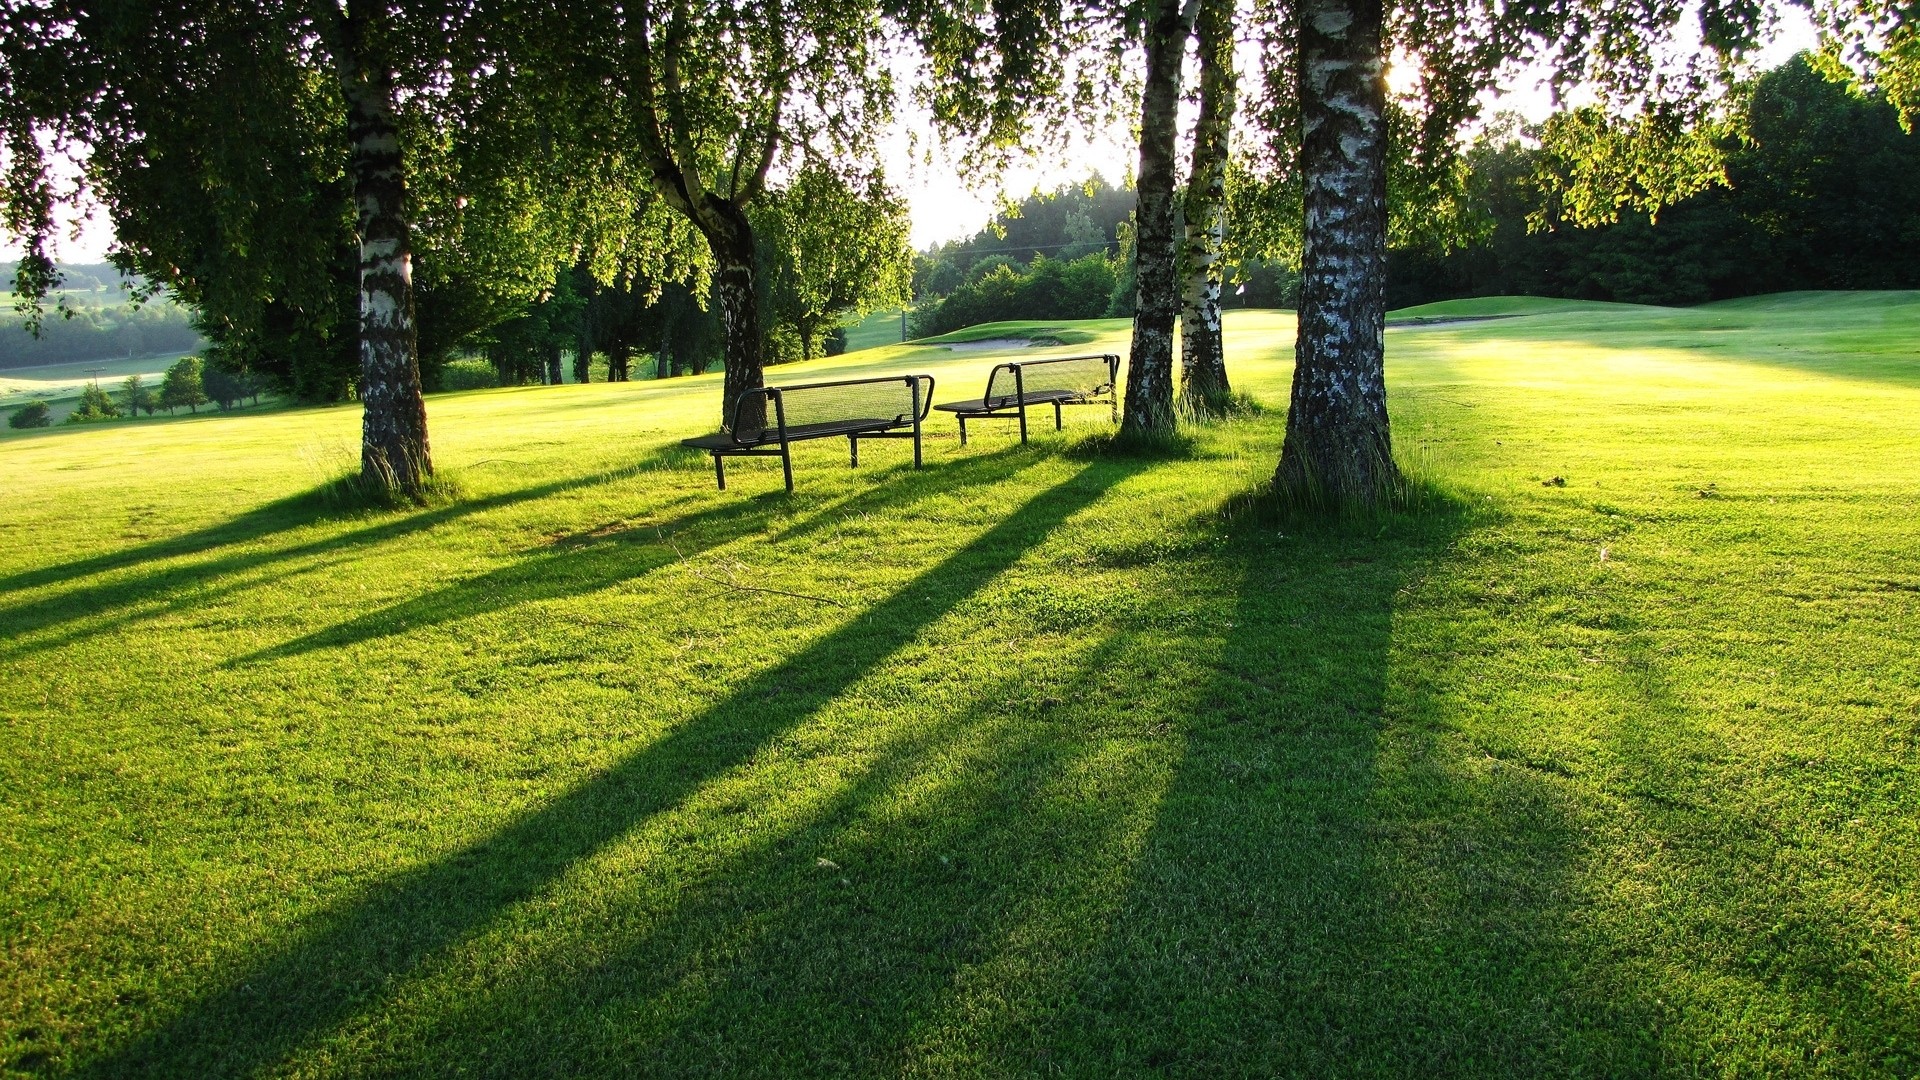 General 1920x1080 bench trees grass park outdoors plants